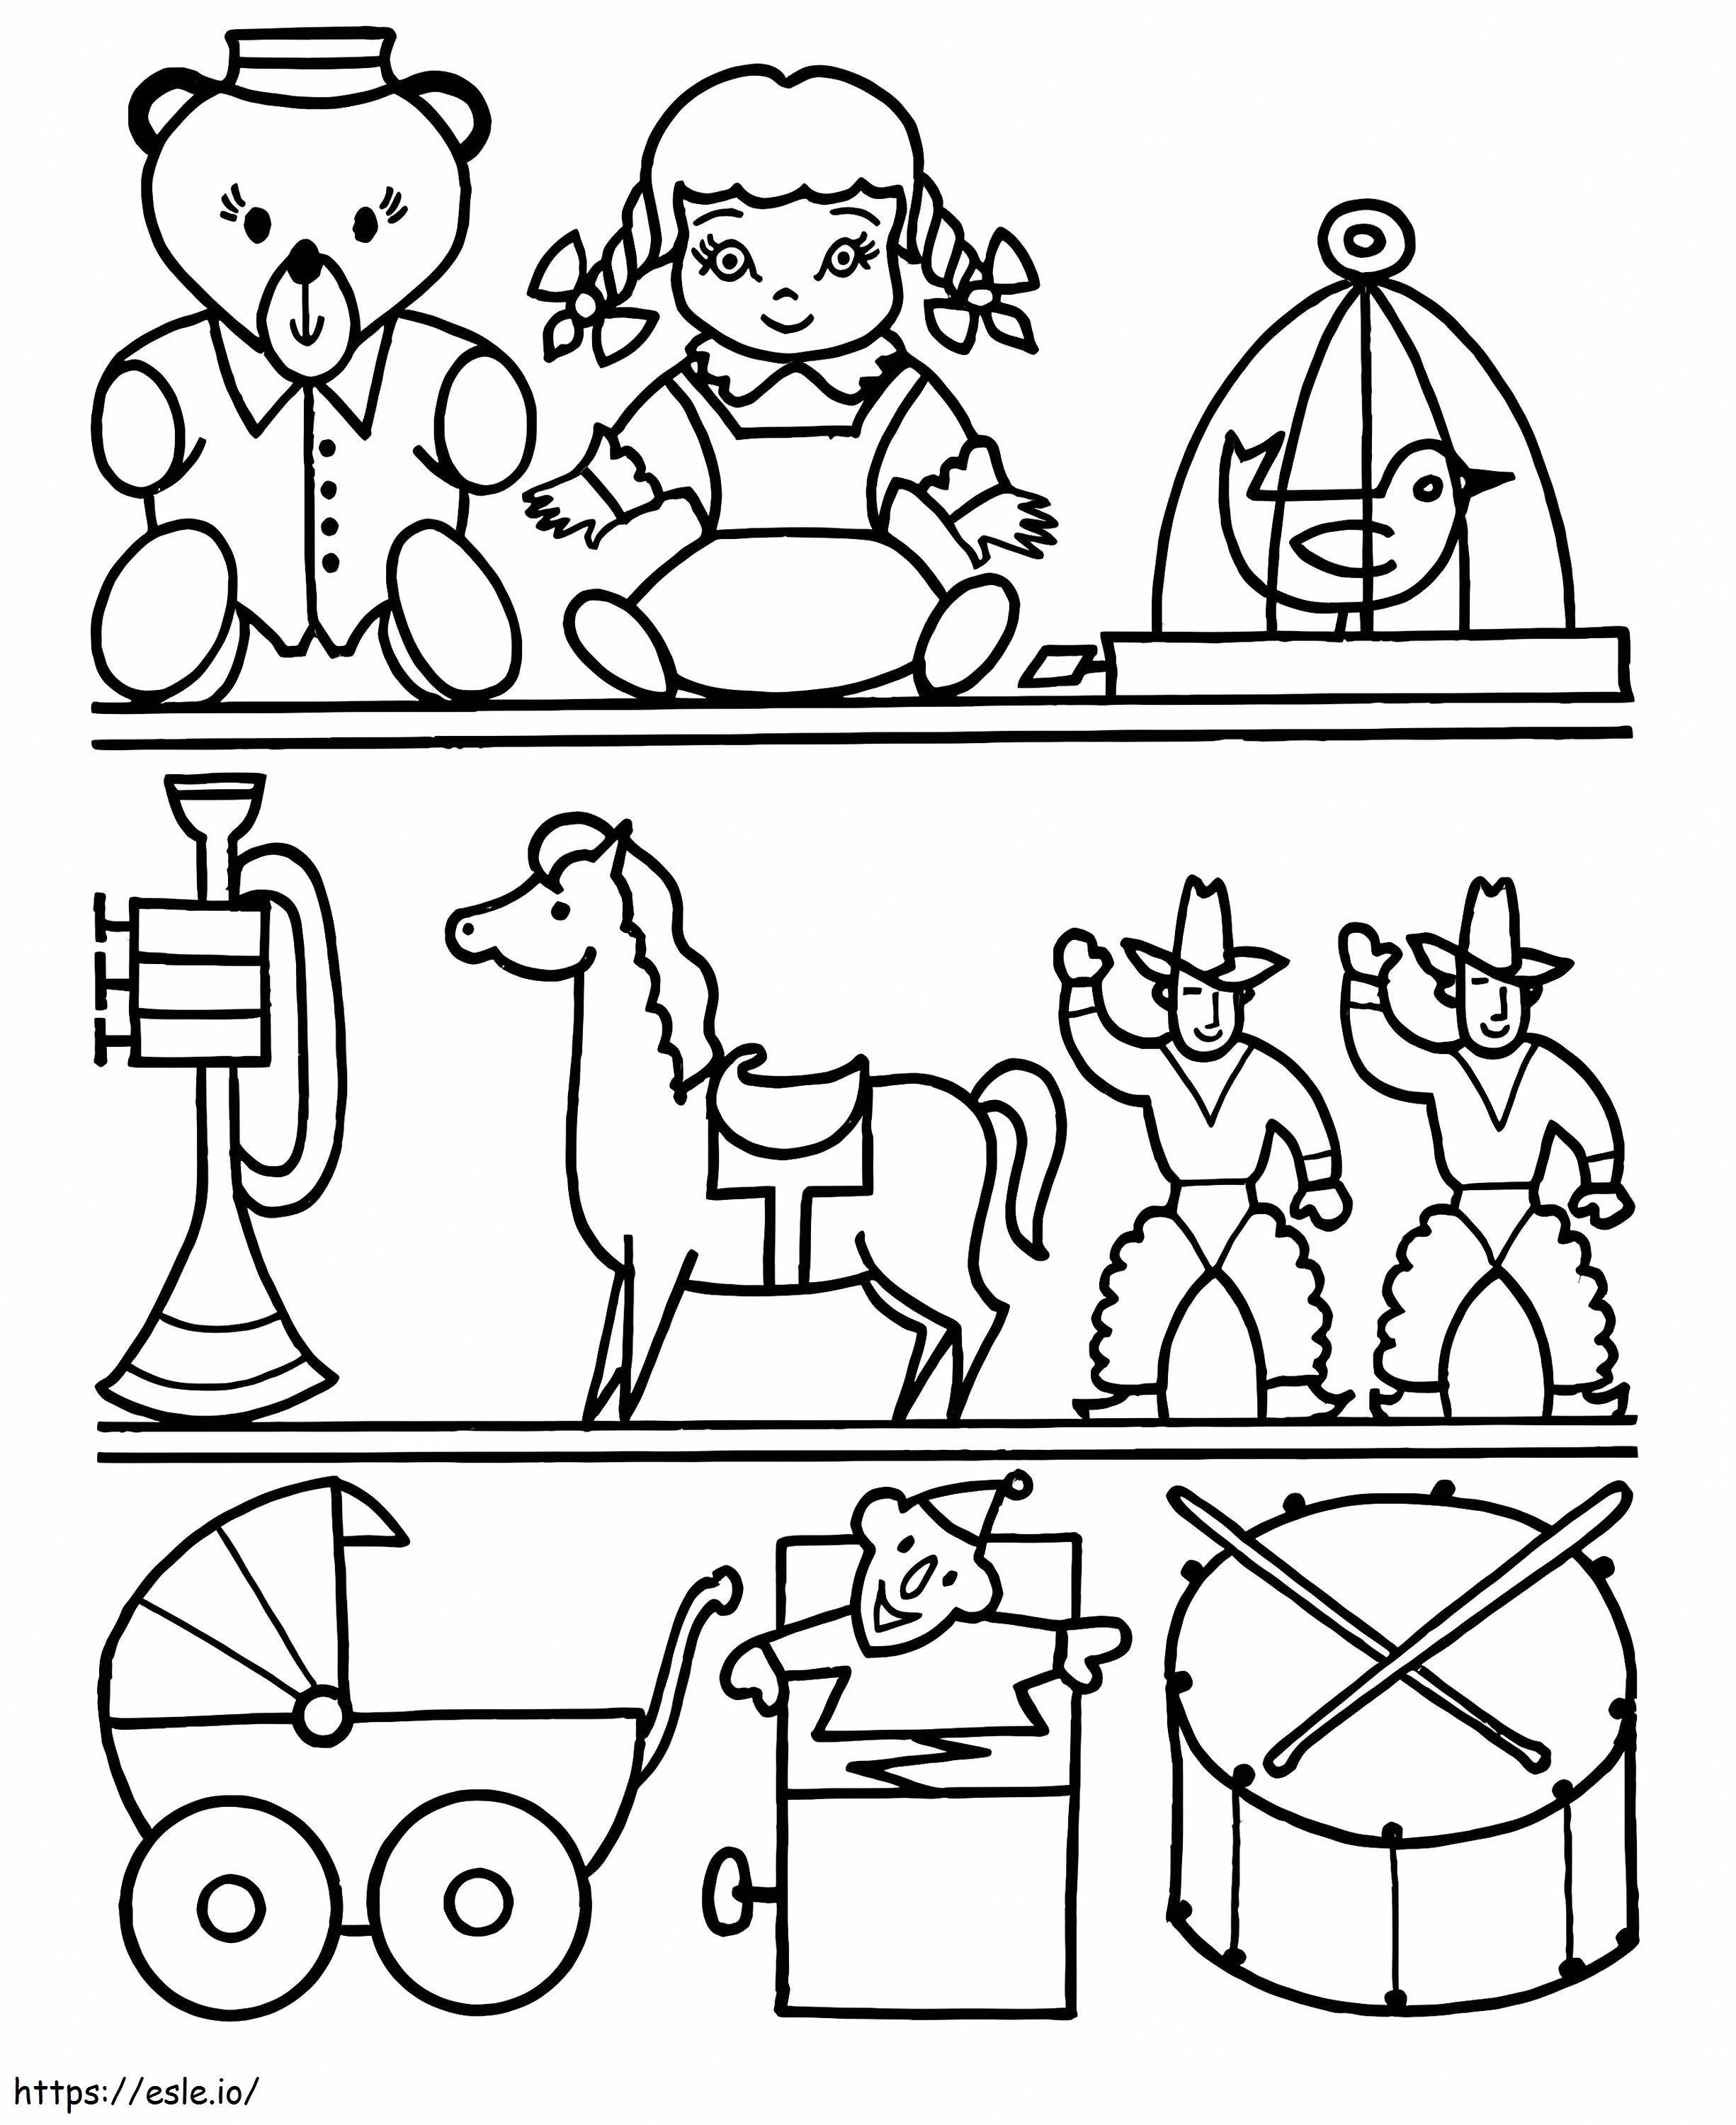 Toy Shelf coloring page